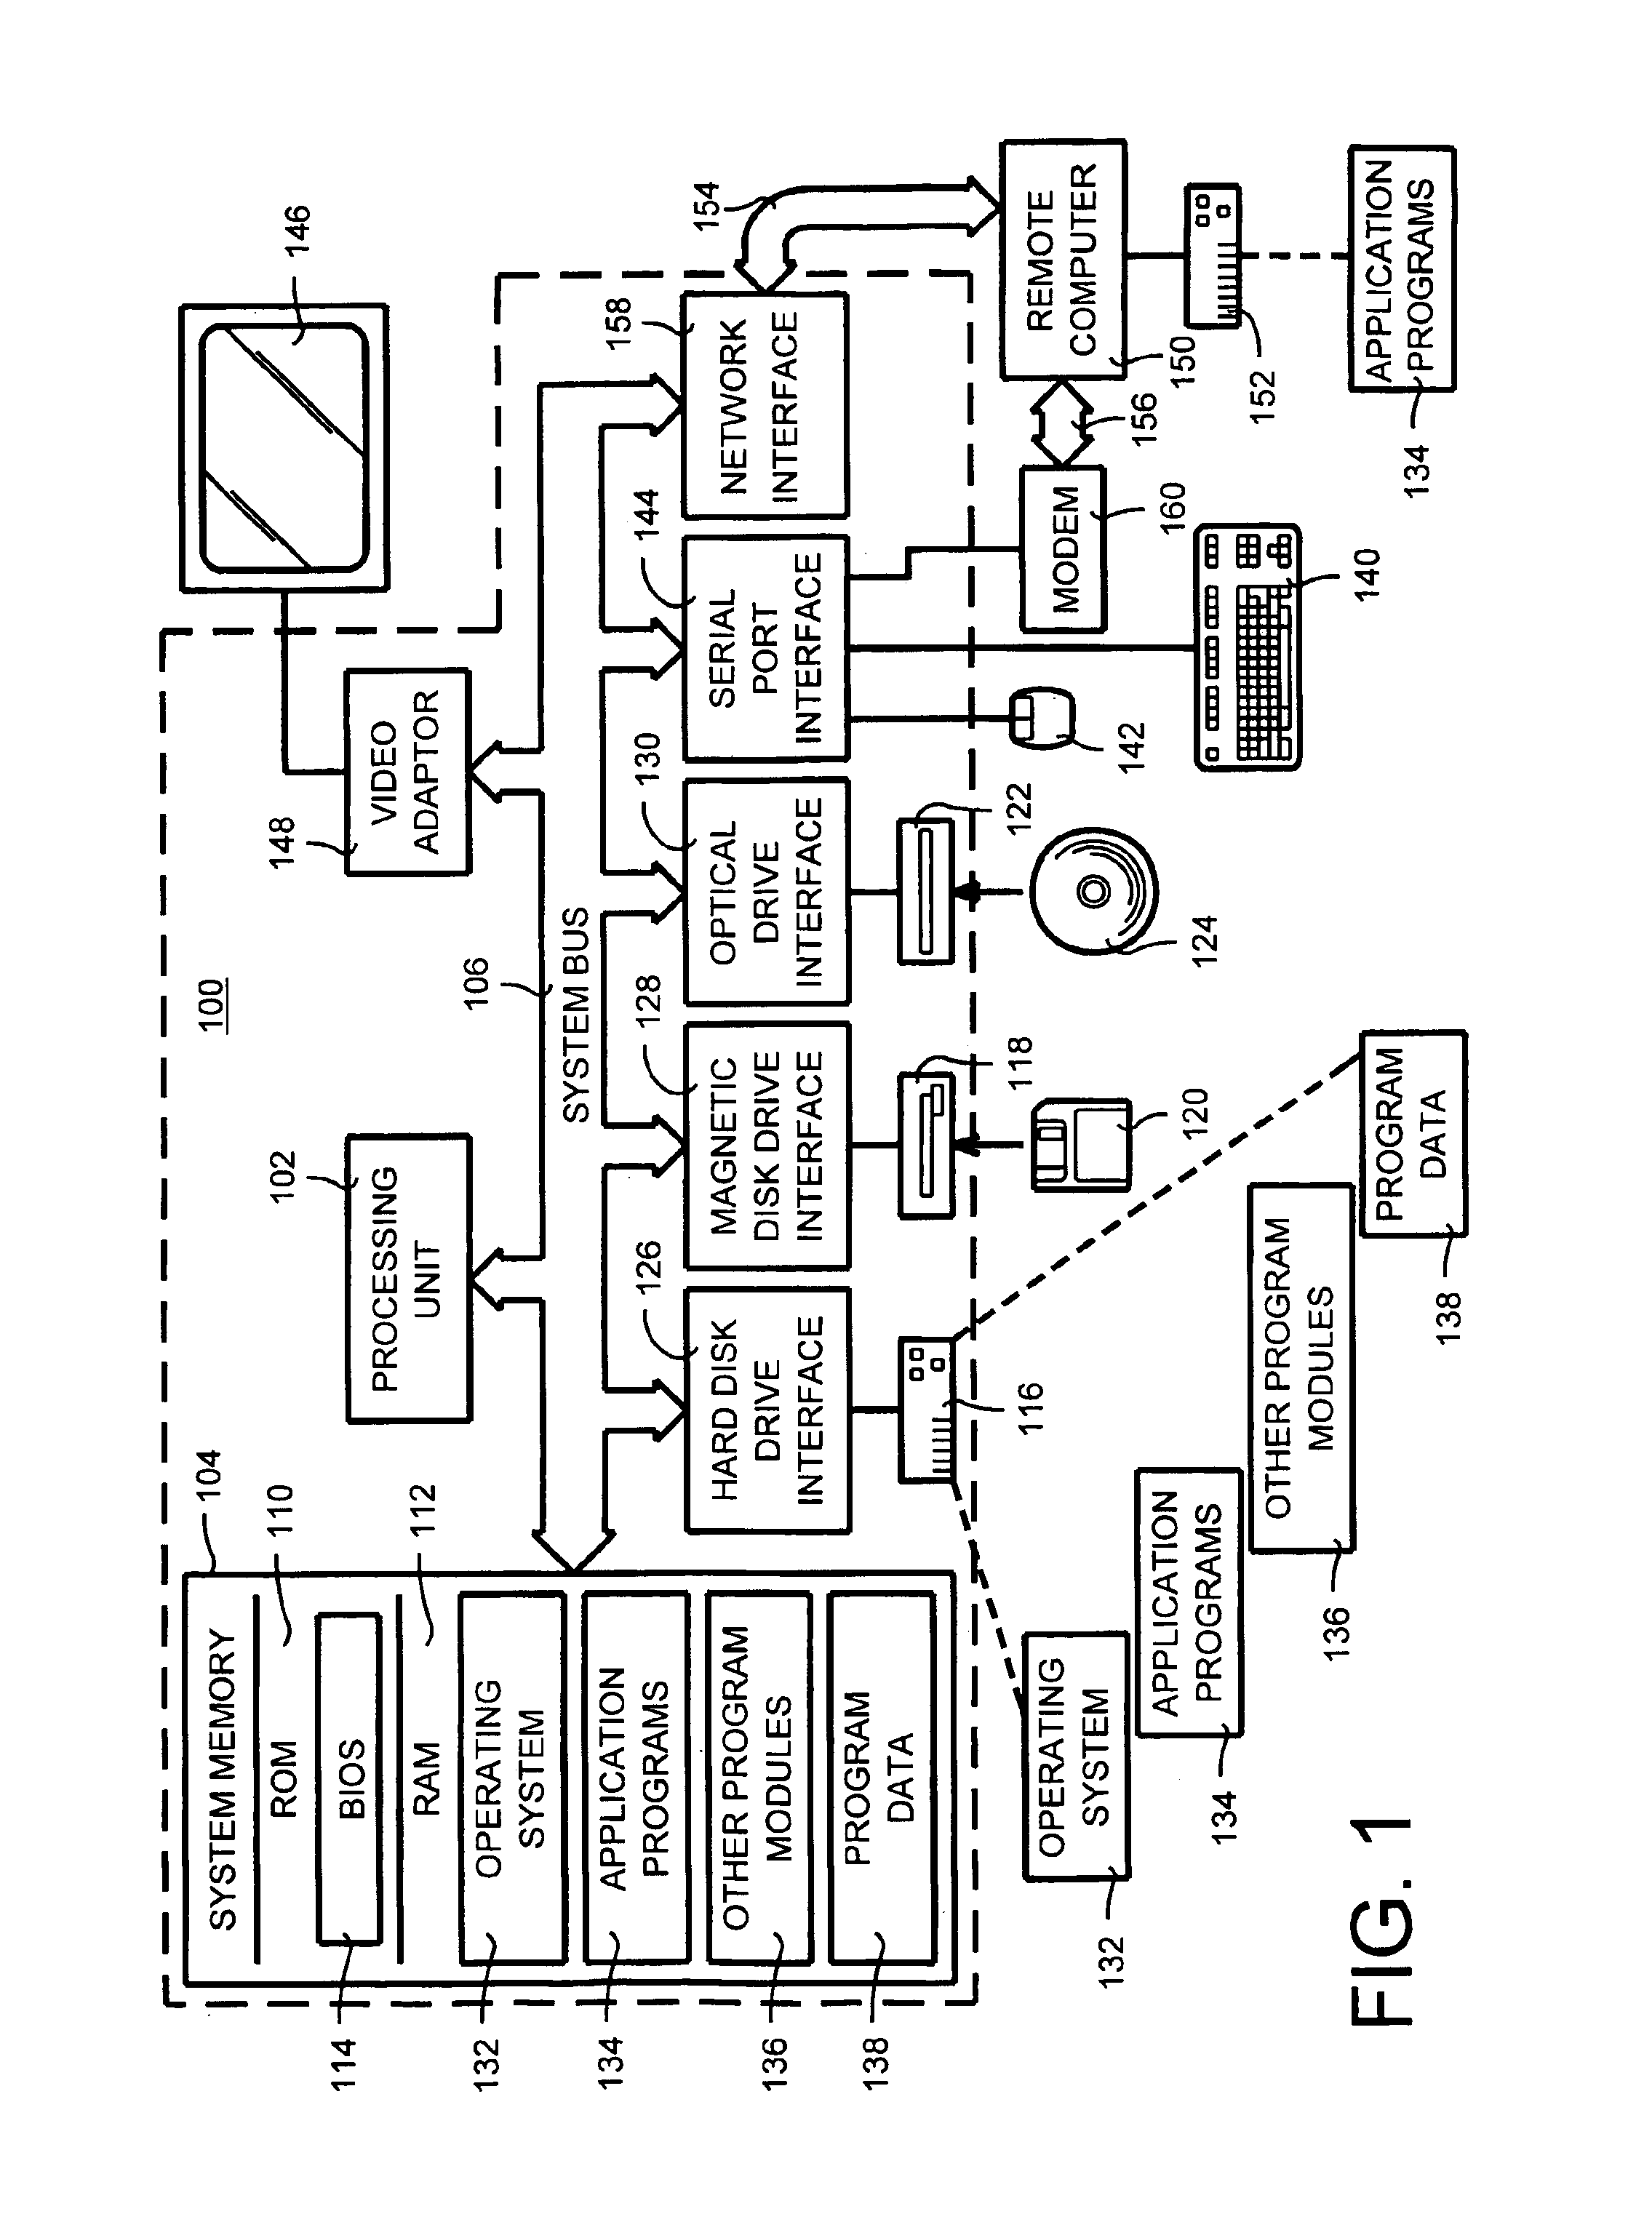 System and method for automatically populating a dynamic resolution list